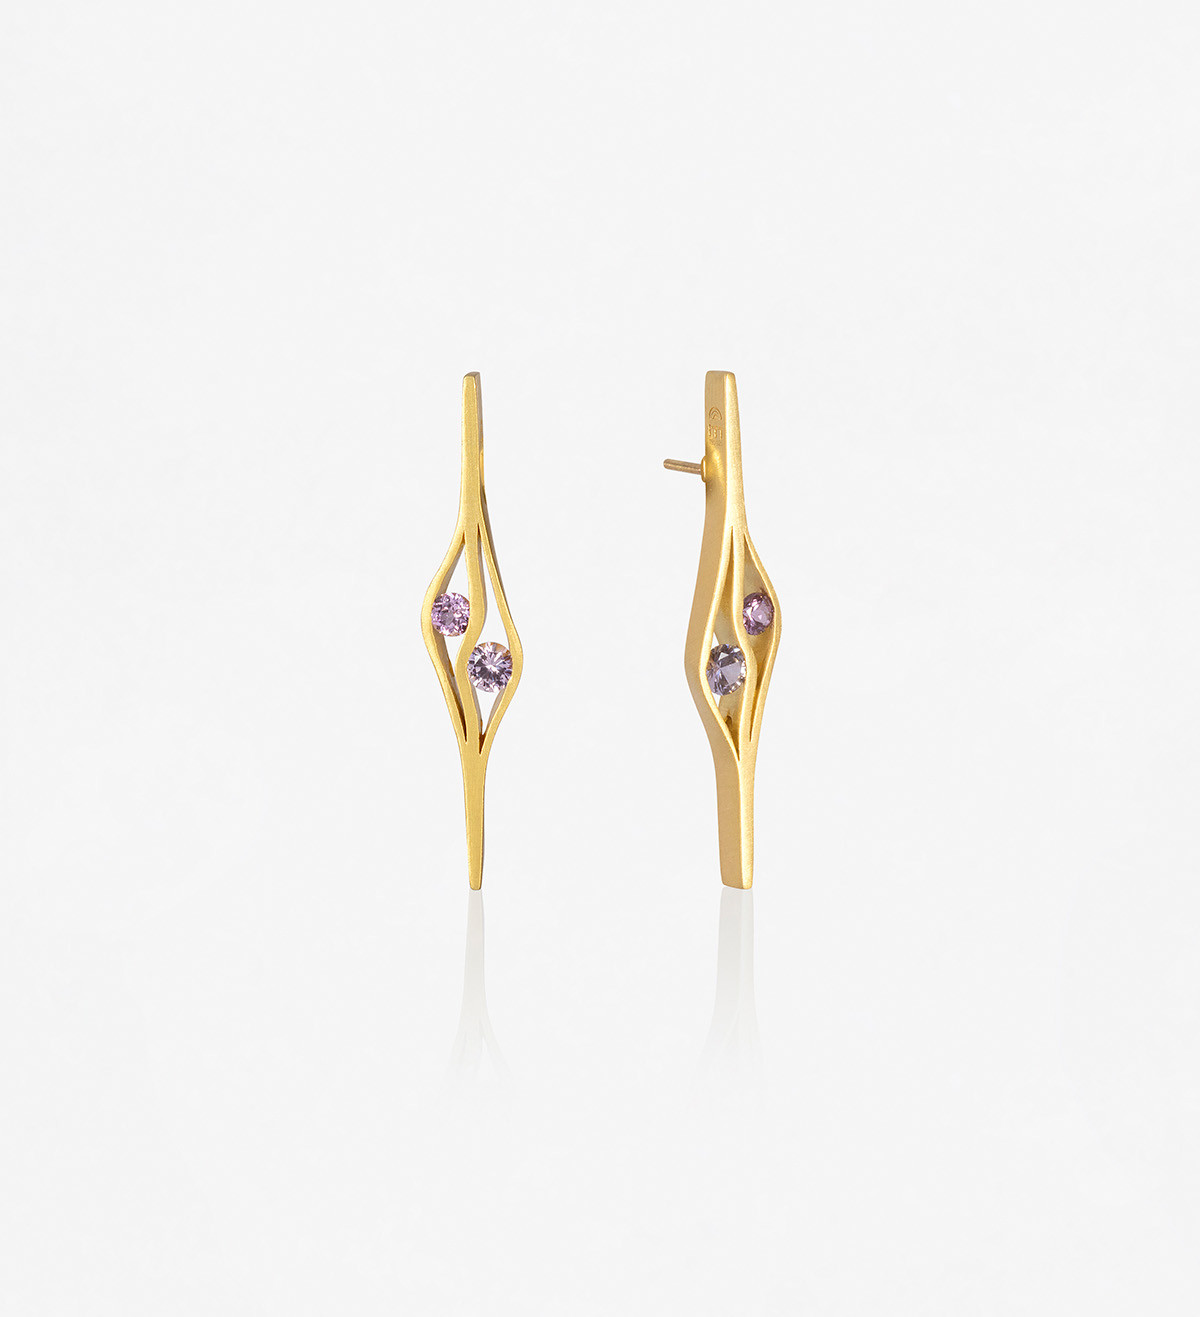 18k gold earrings with purple Wennick-Lefèvre sapphire 1,16ct